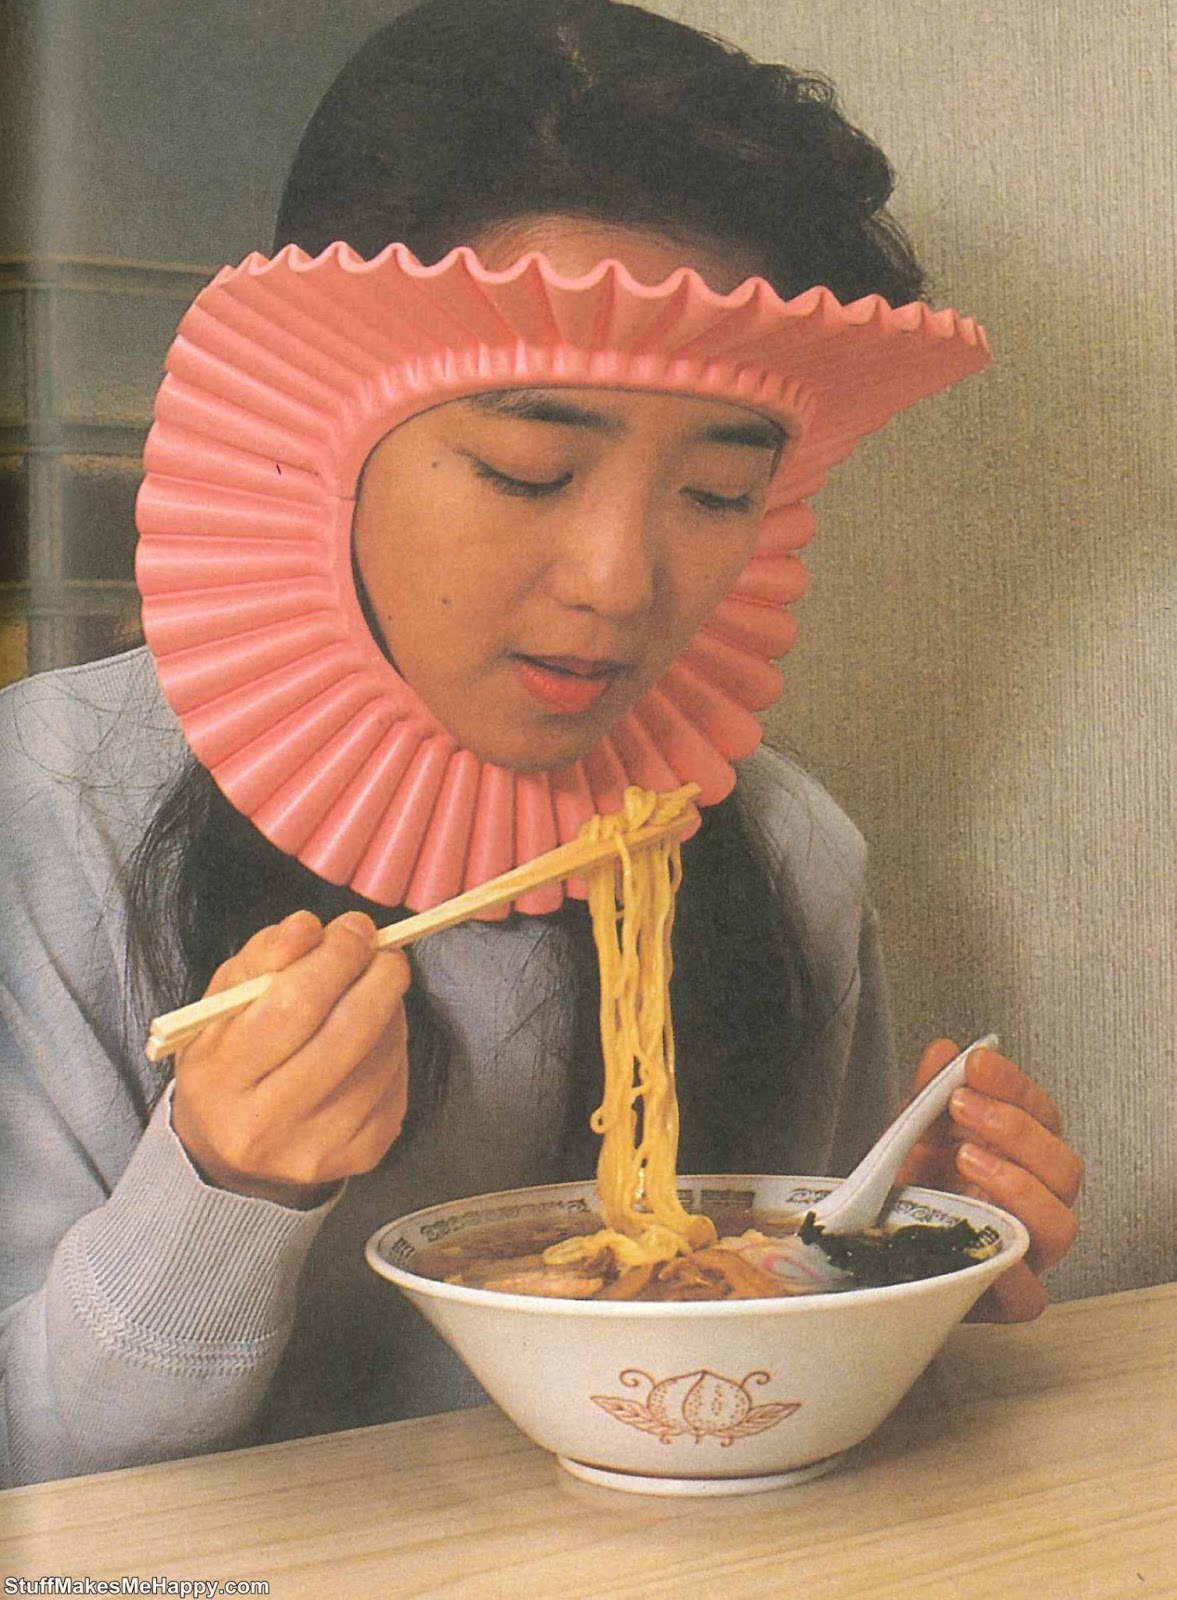 14. Mask, protecting hair from getting into the plate